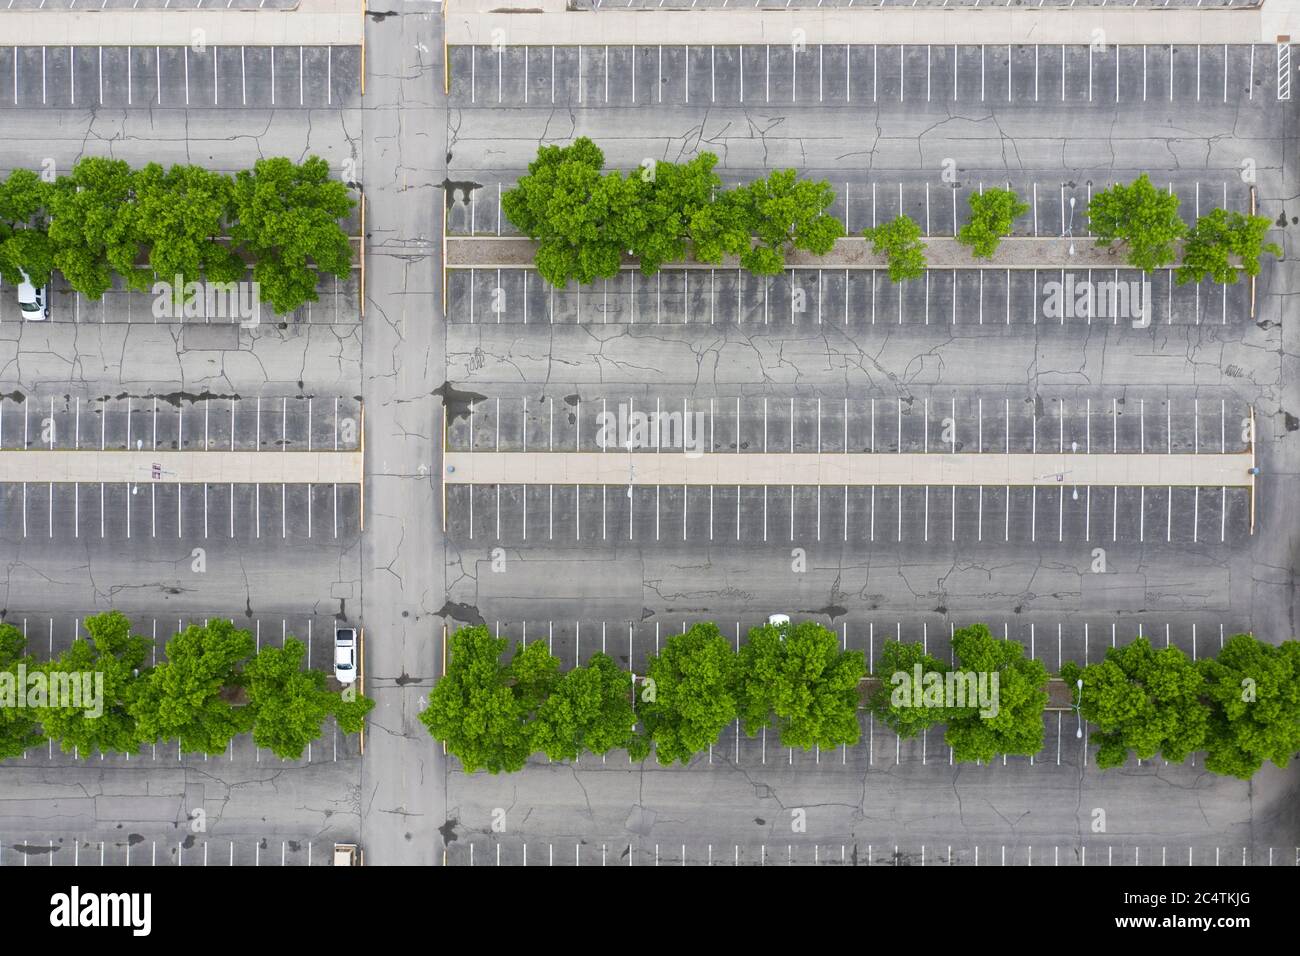 Abstract drone view looking down on an almost empty asphalt parking lot with rows of trees Stock Photo